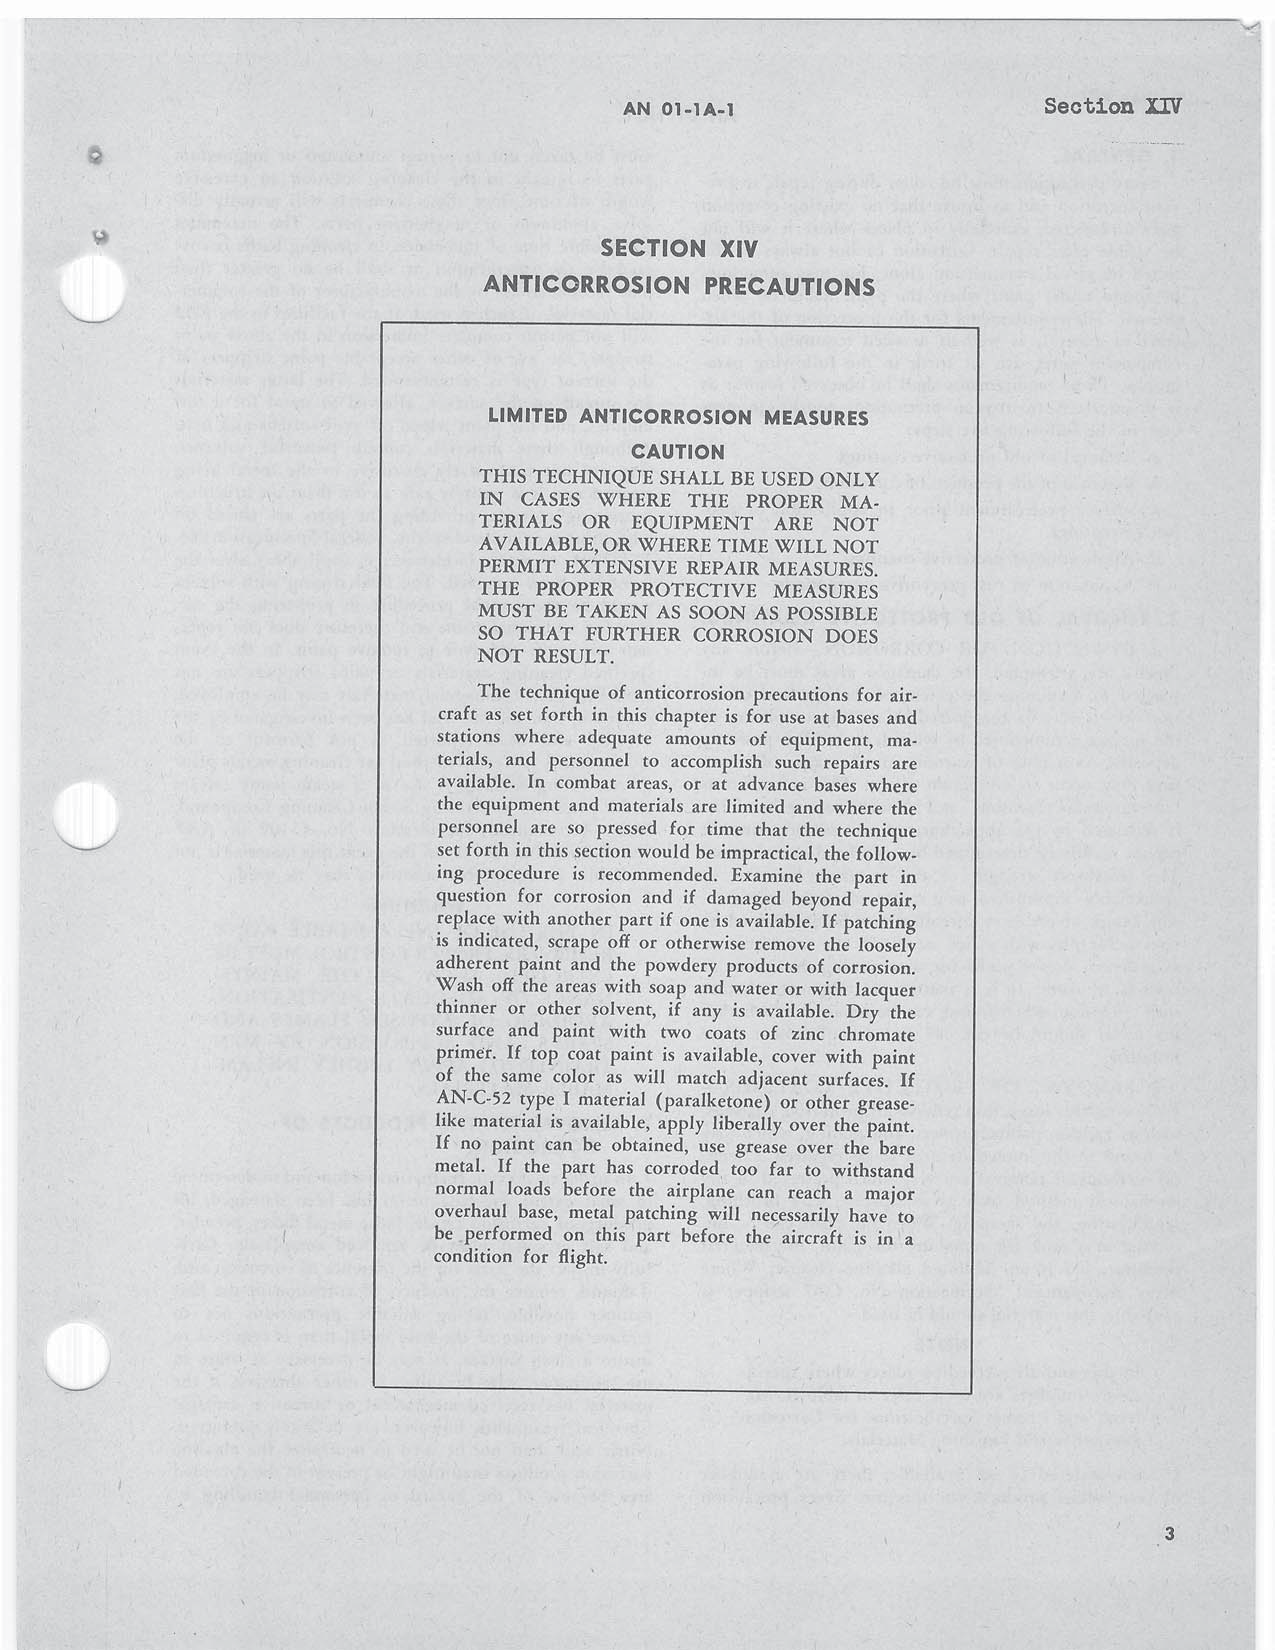 Sample page 203 from AirCorps Library document: General Manual for Structural Repair